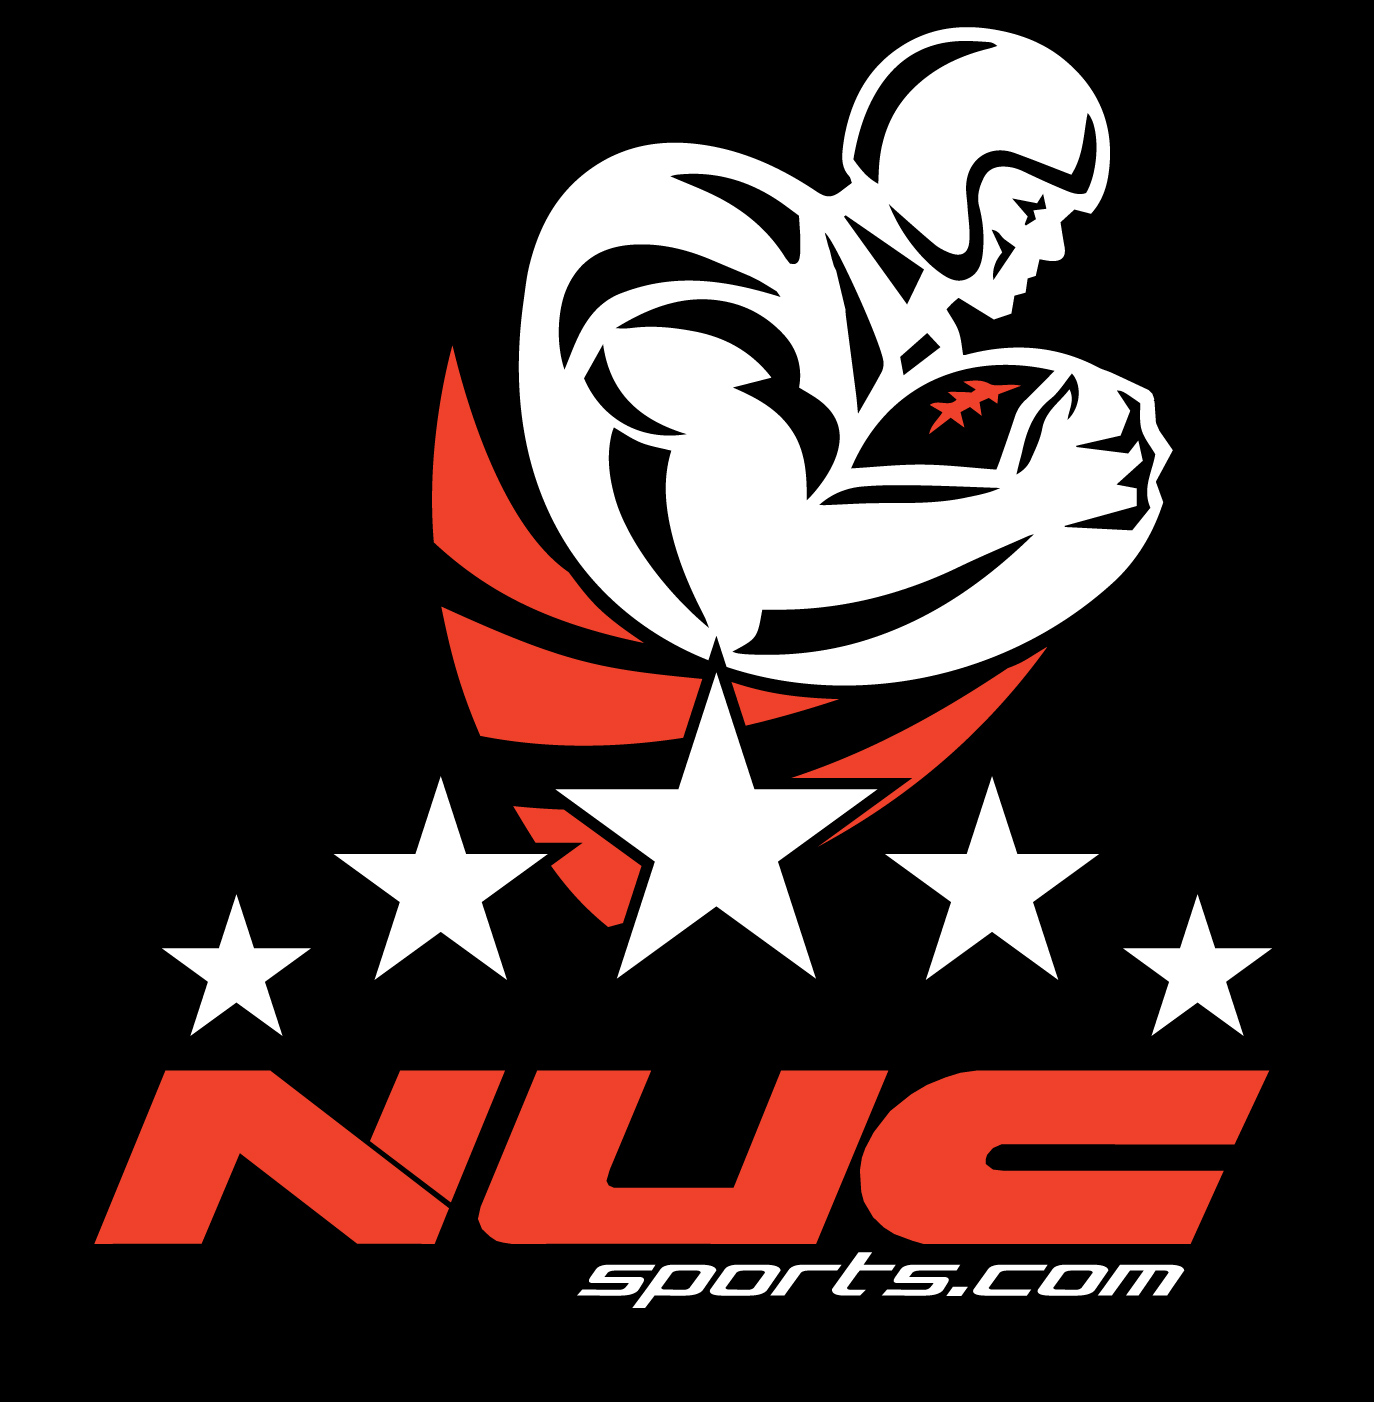 Nuc Sports Football Events Have Labor Day Special Of 40 Off All Events Per Nuc Sports Newswire